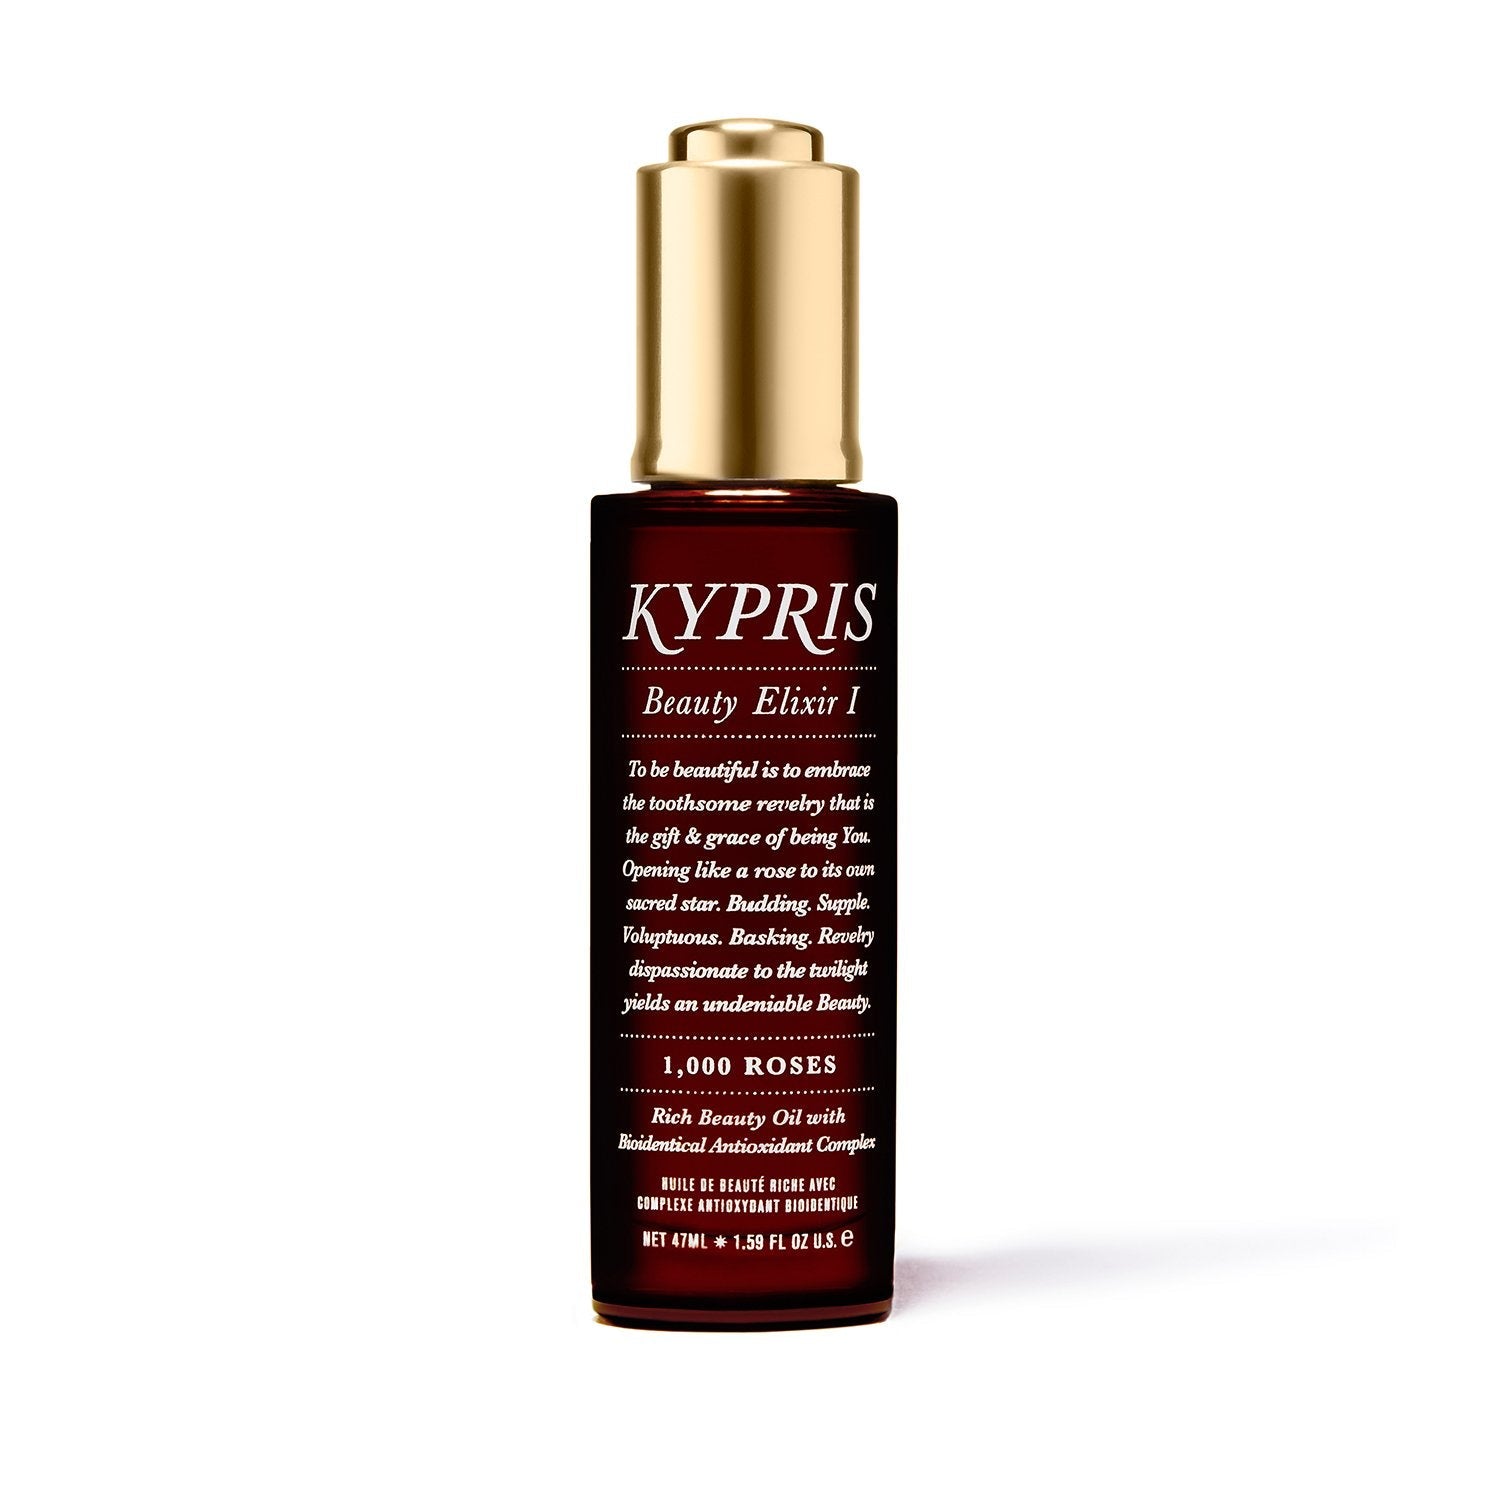 Daytime Microemulsion with Beauty Elixir I for Dry, Dehydrated Skin